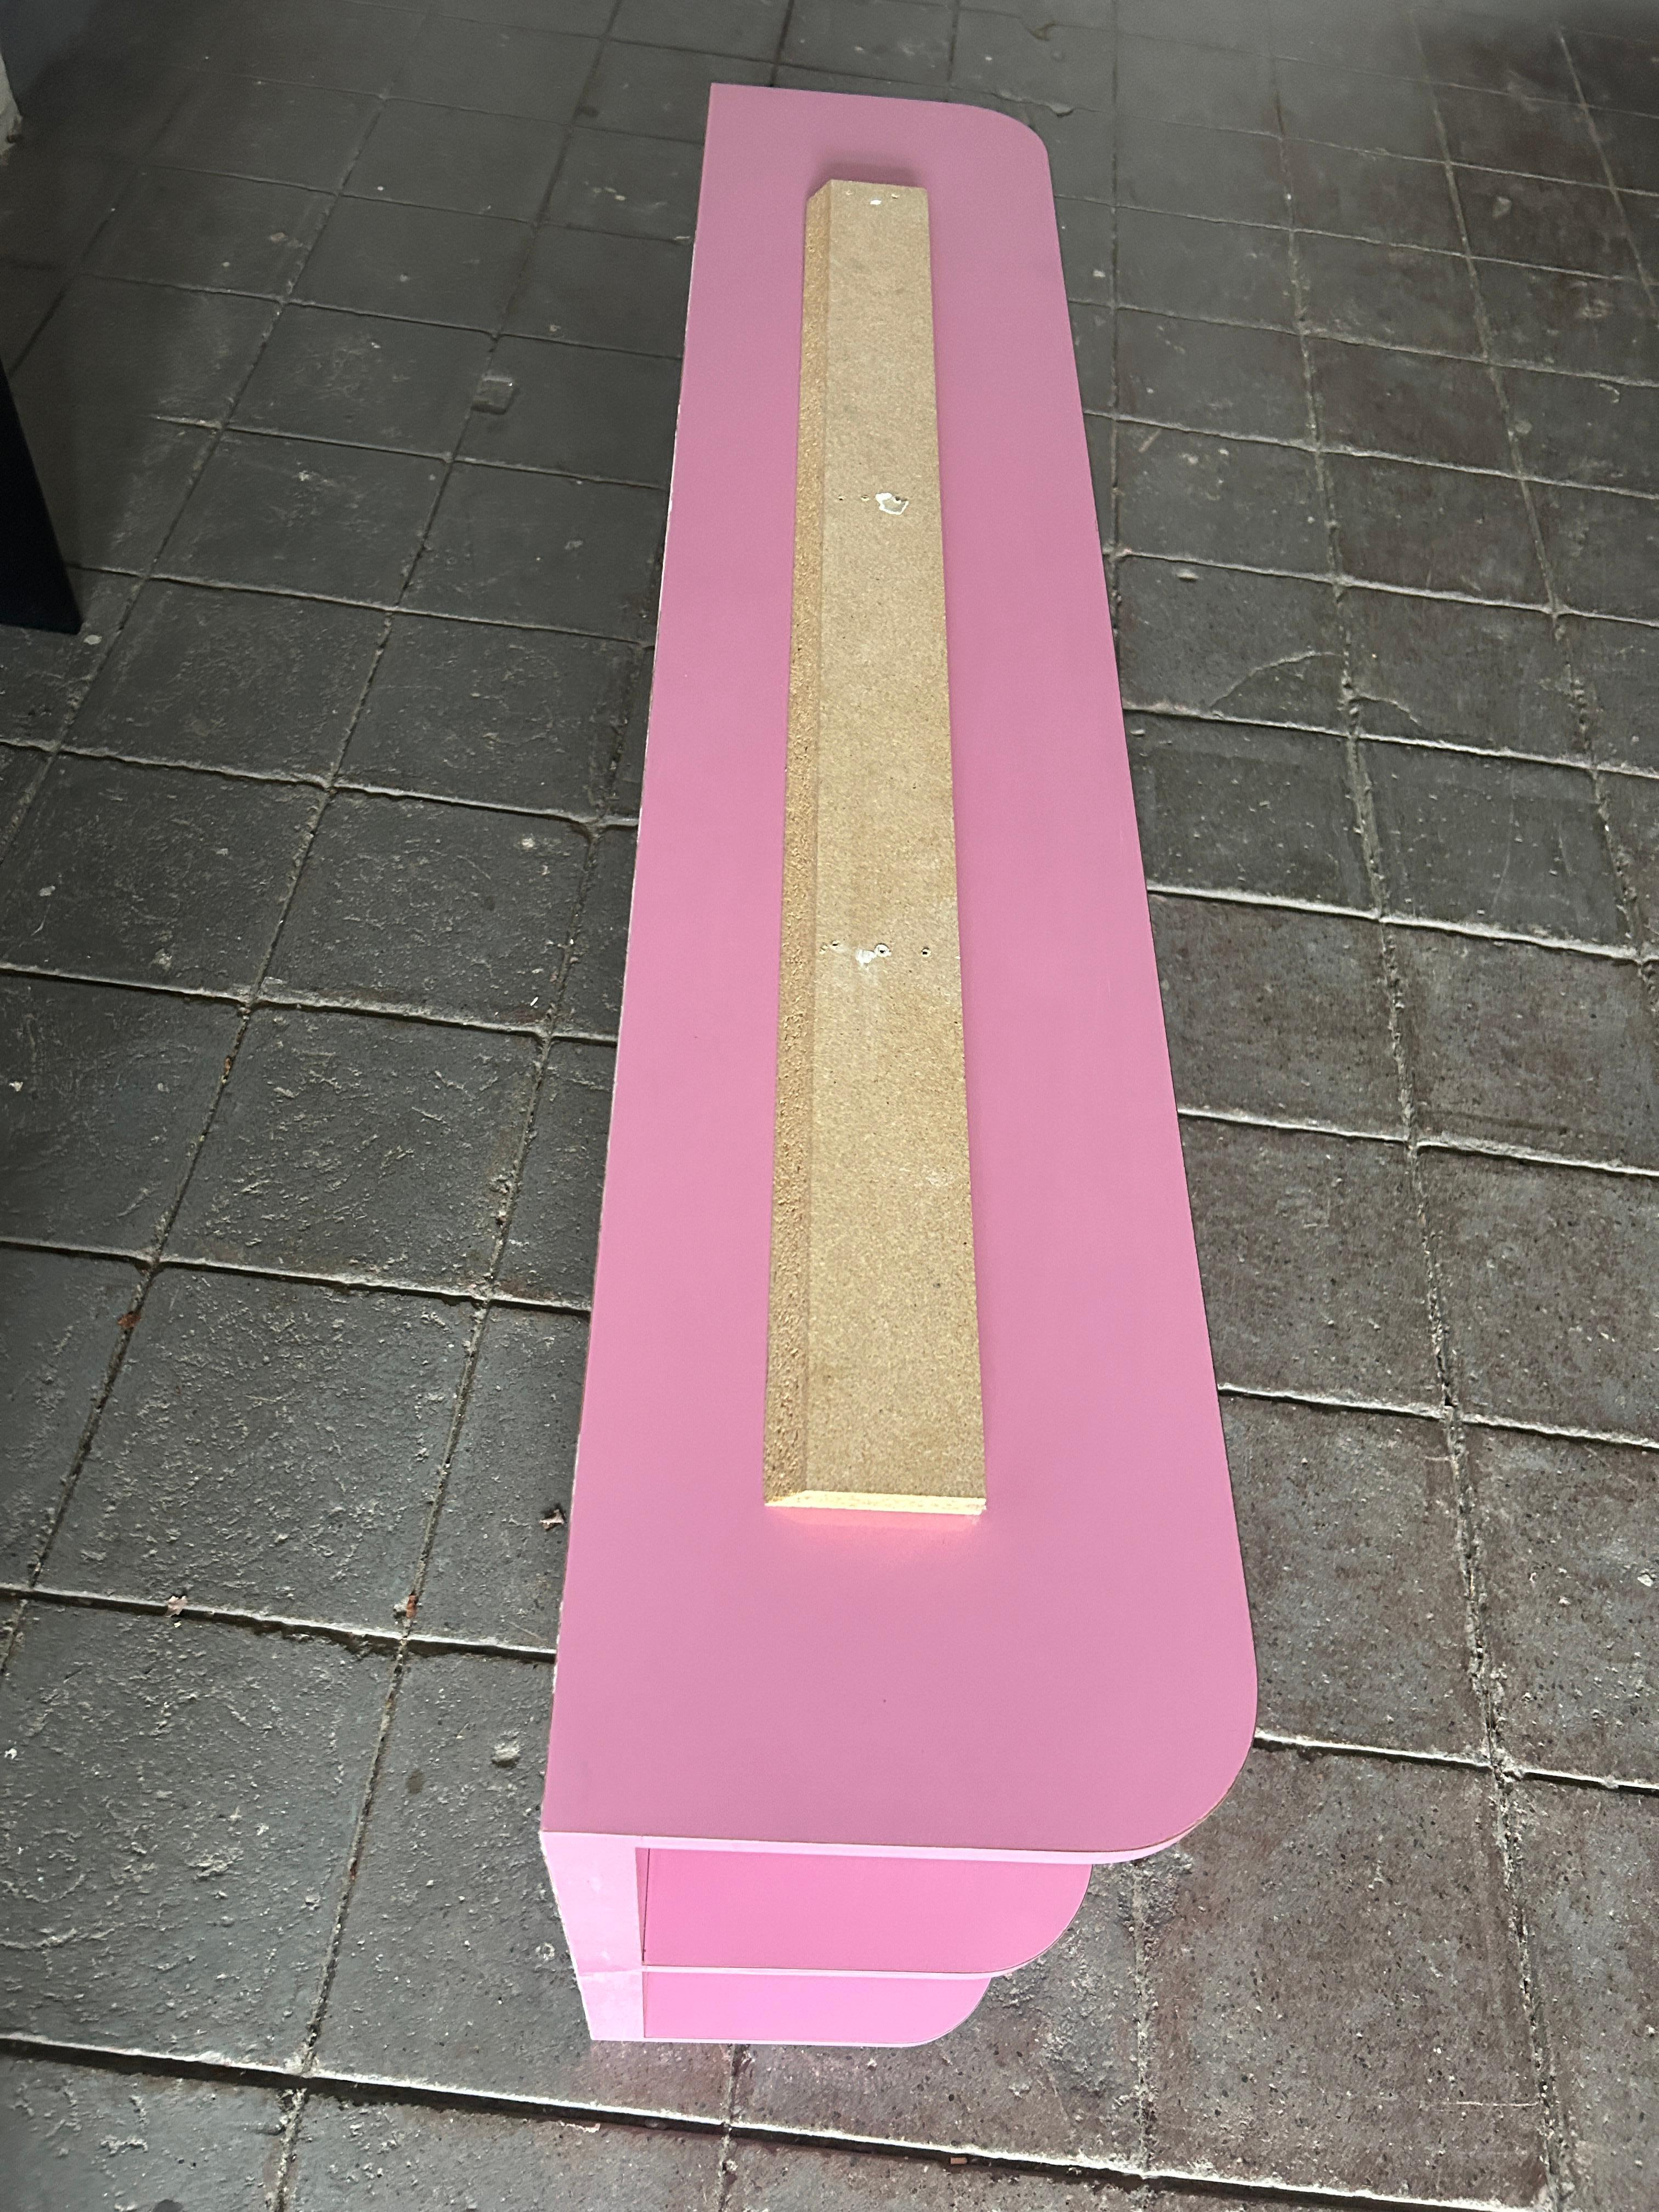 Pop art Post modern Pink Gloss Laminate floating wall mounted shelf unit In Good Condition For Sale In BROOKLYN, NY